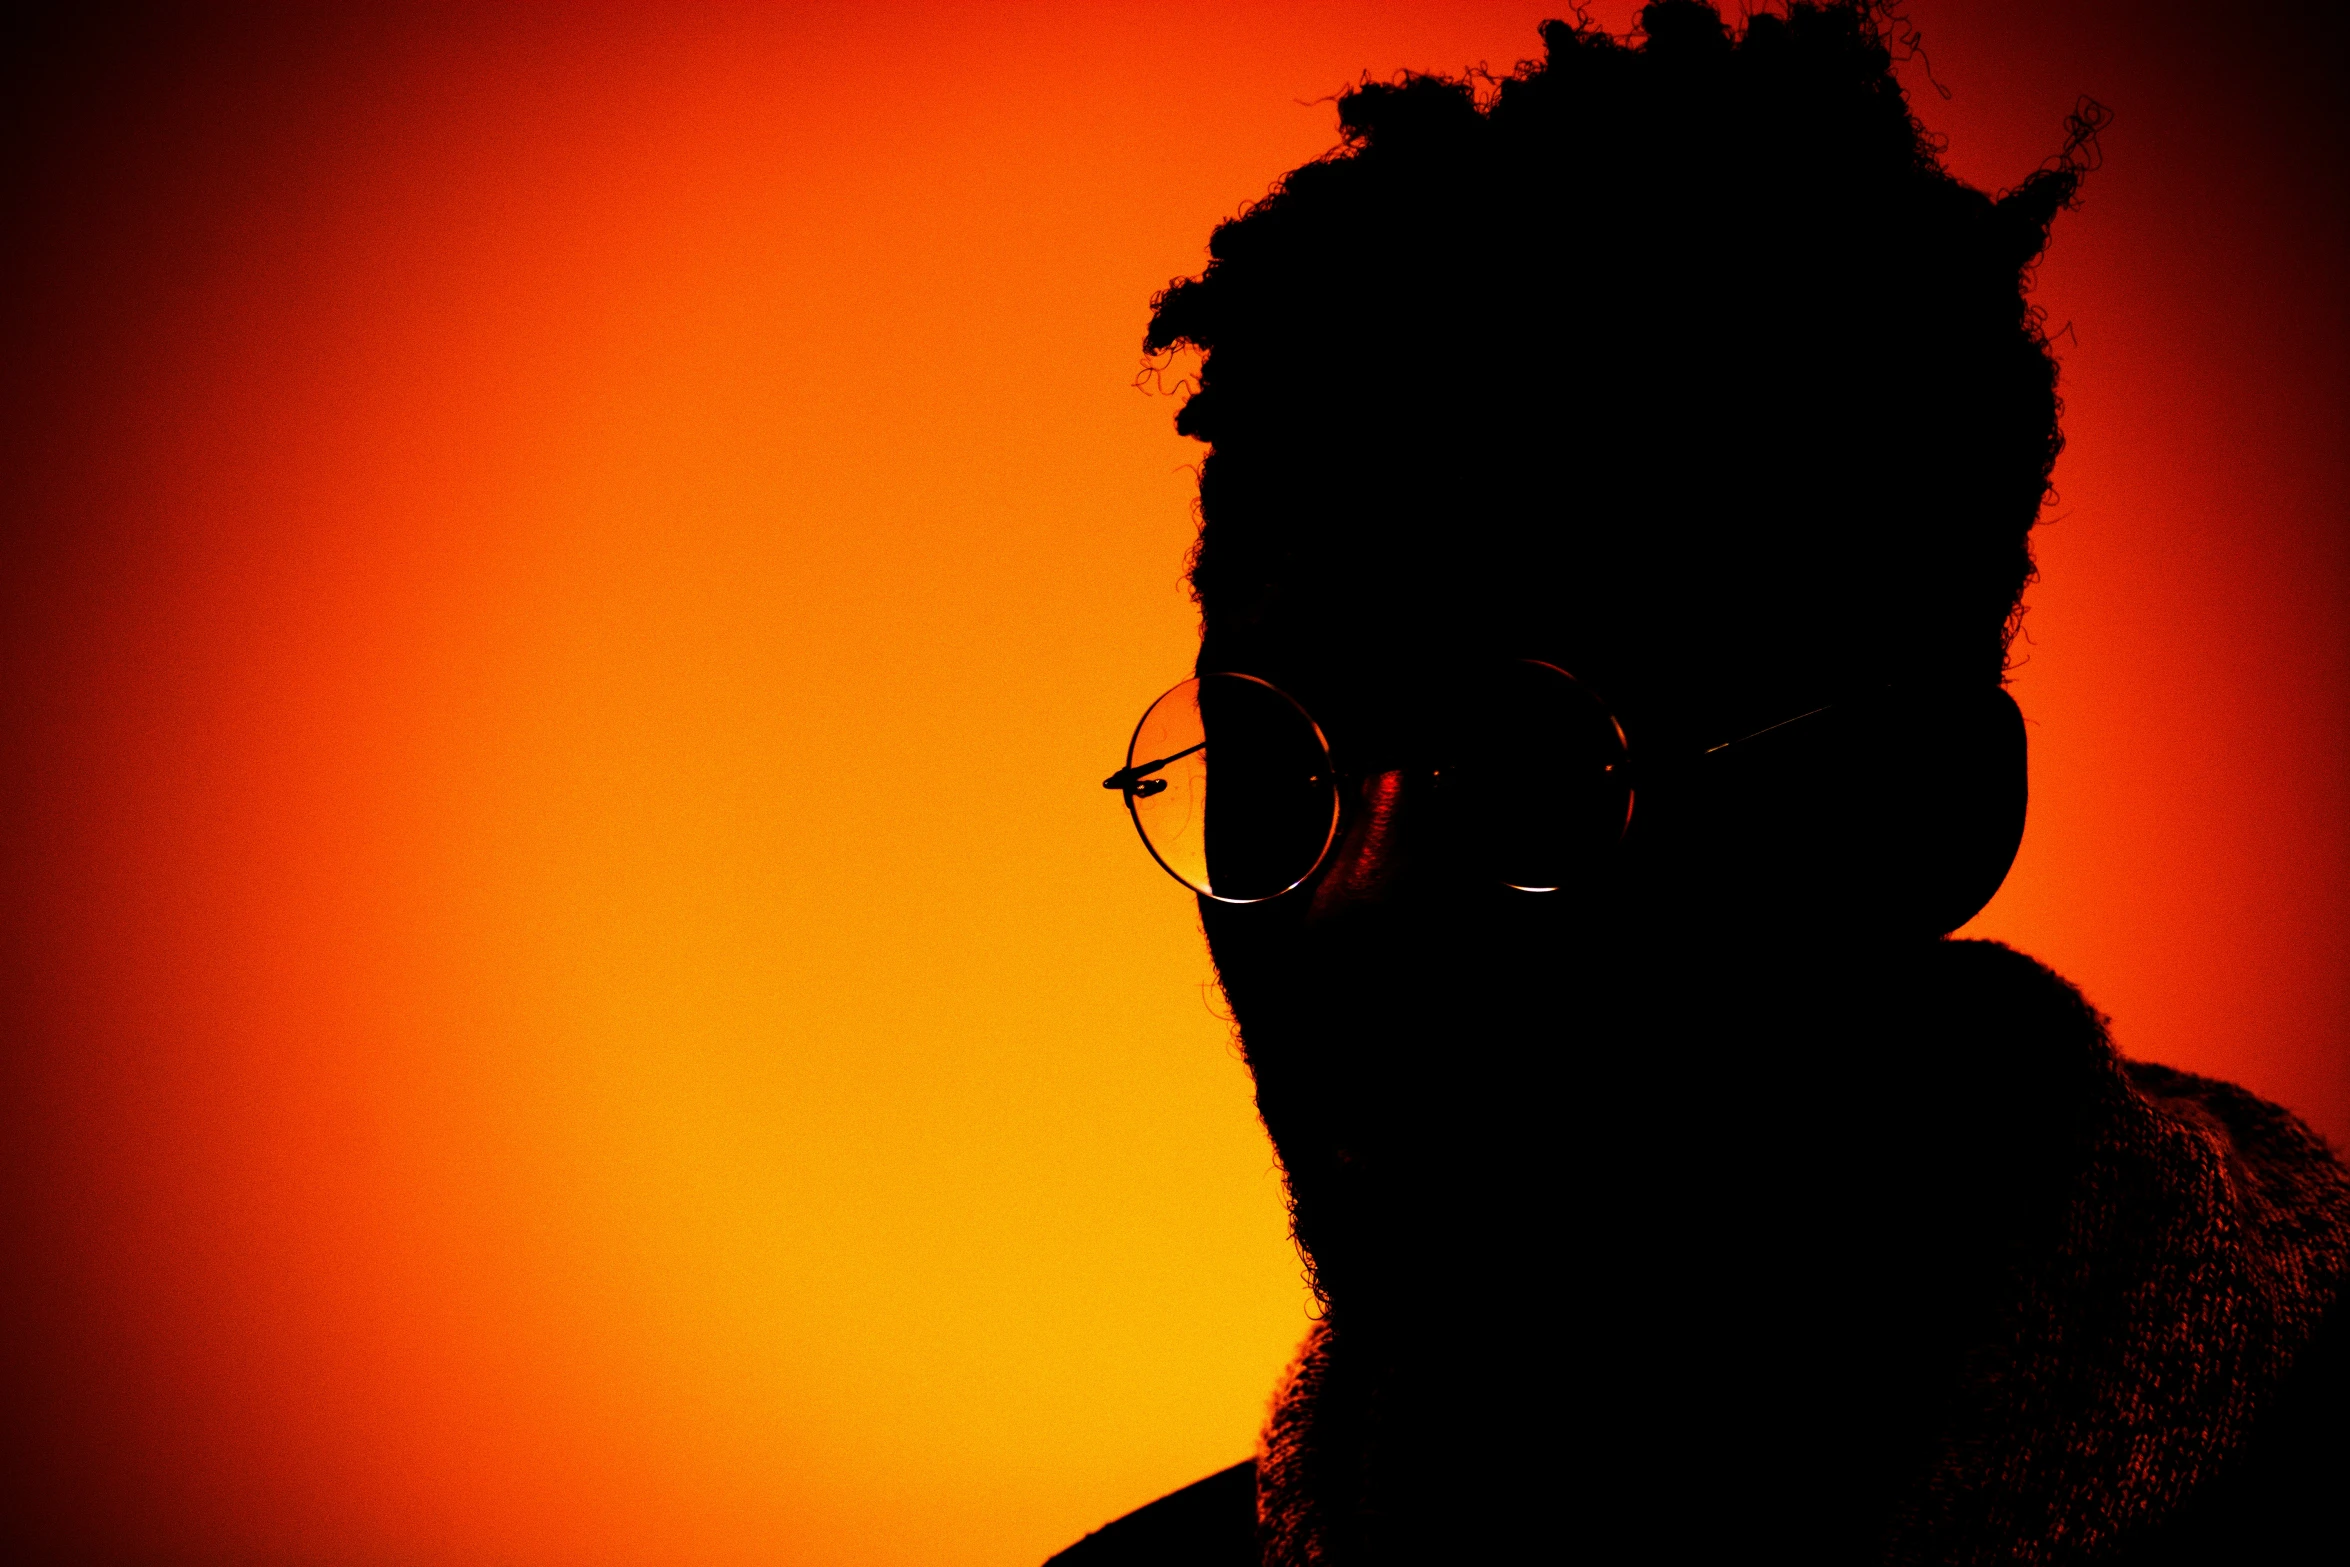 a man with a beard and eye glasses in front of an orange sky